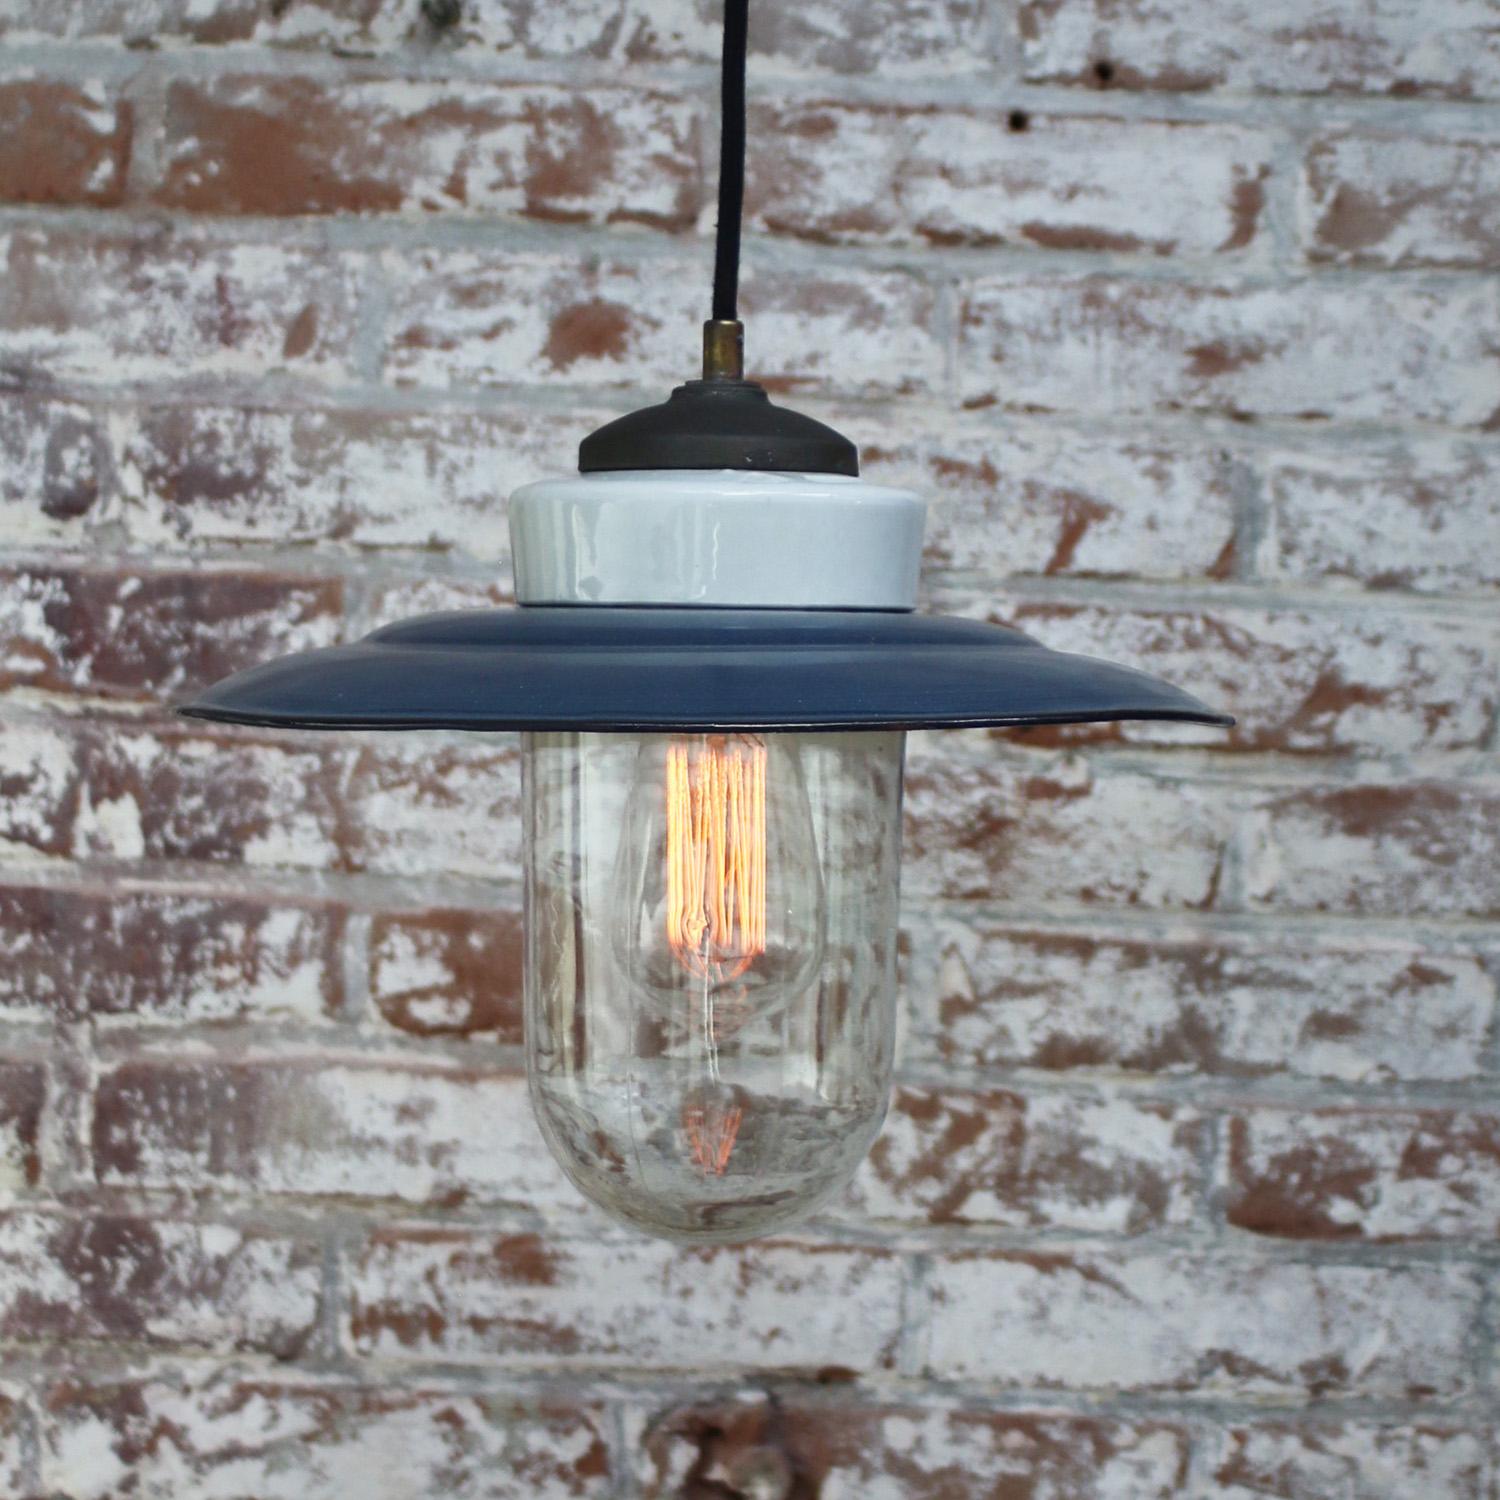 Porcelain Industrial hanging lamp.
White porcelain, cast iron and clear glass.
Blue enamel shade
2 conductors, no ground.

Weight: 1.90 kg / 4.2 lb

Priced per individual item. All lamps have been made suitable by international standards for